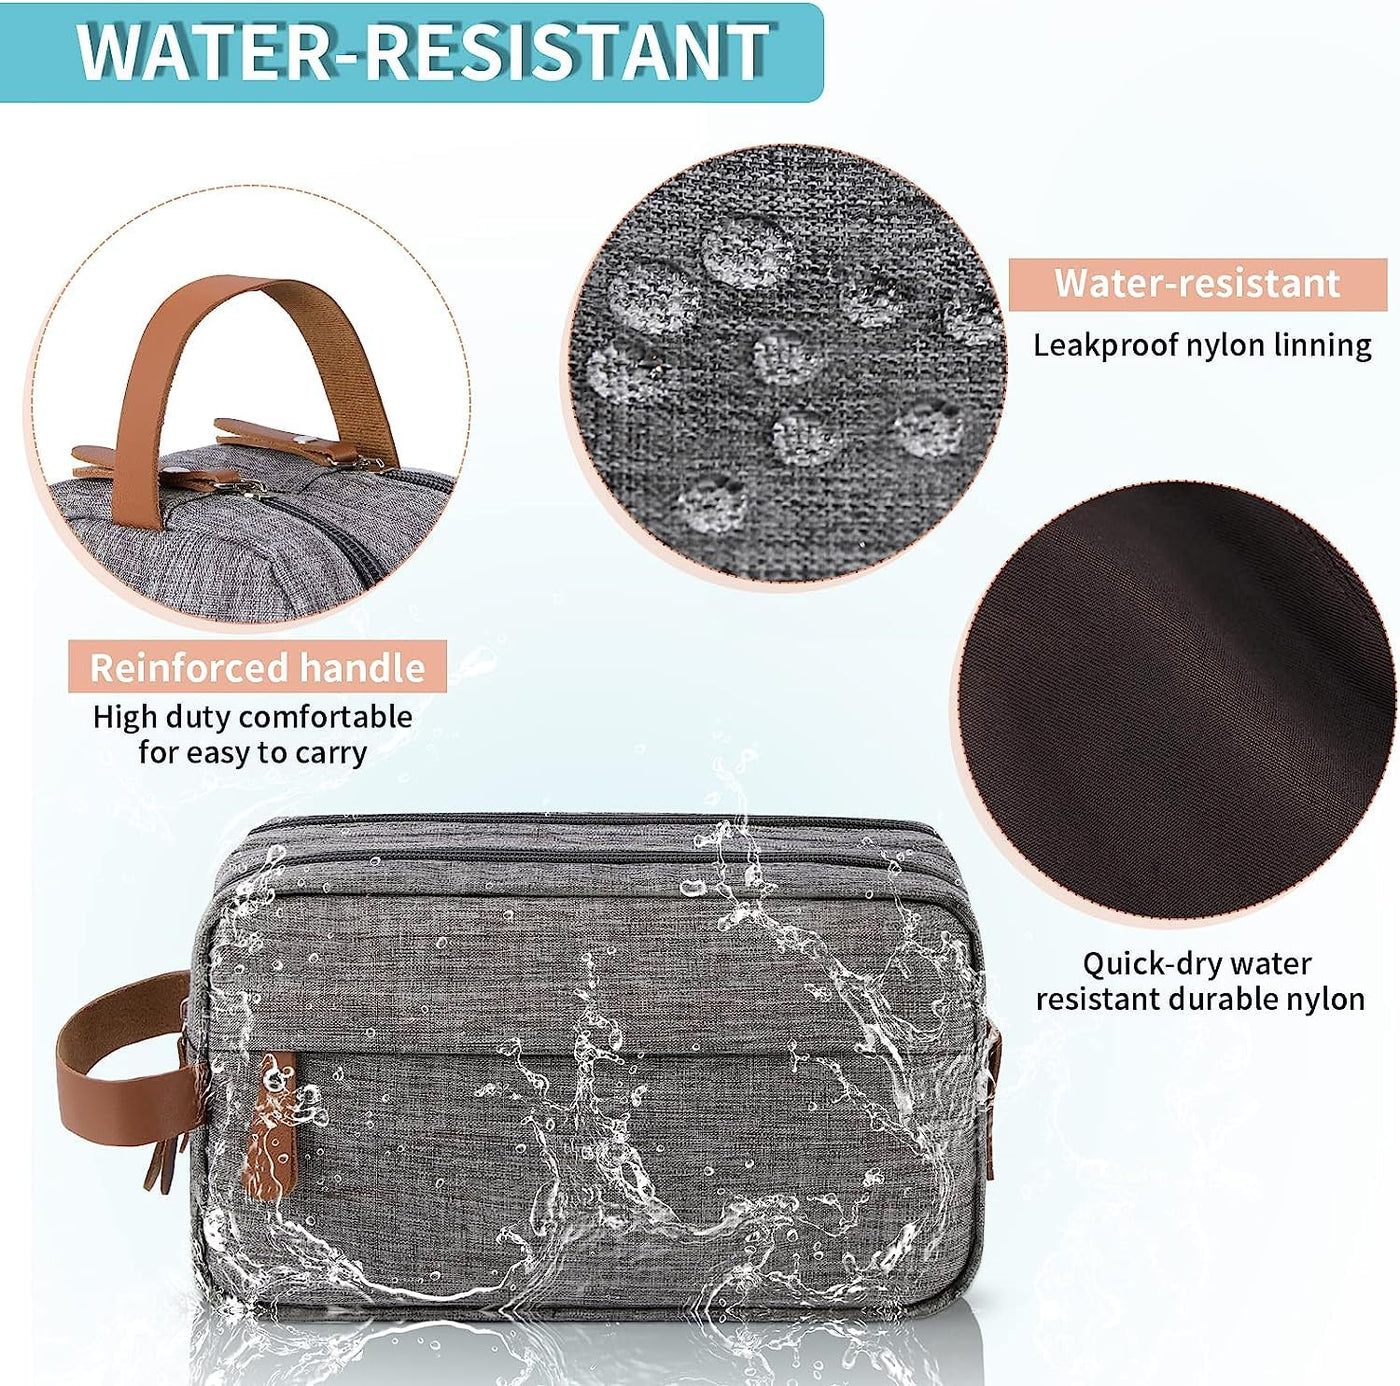 Toiletry Bag for Men and Women